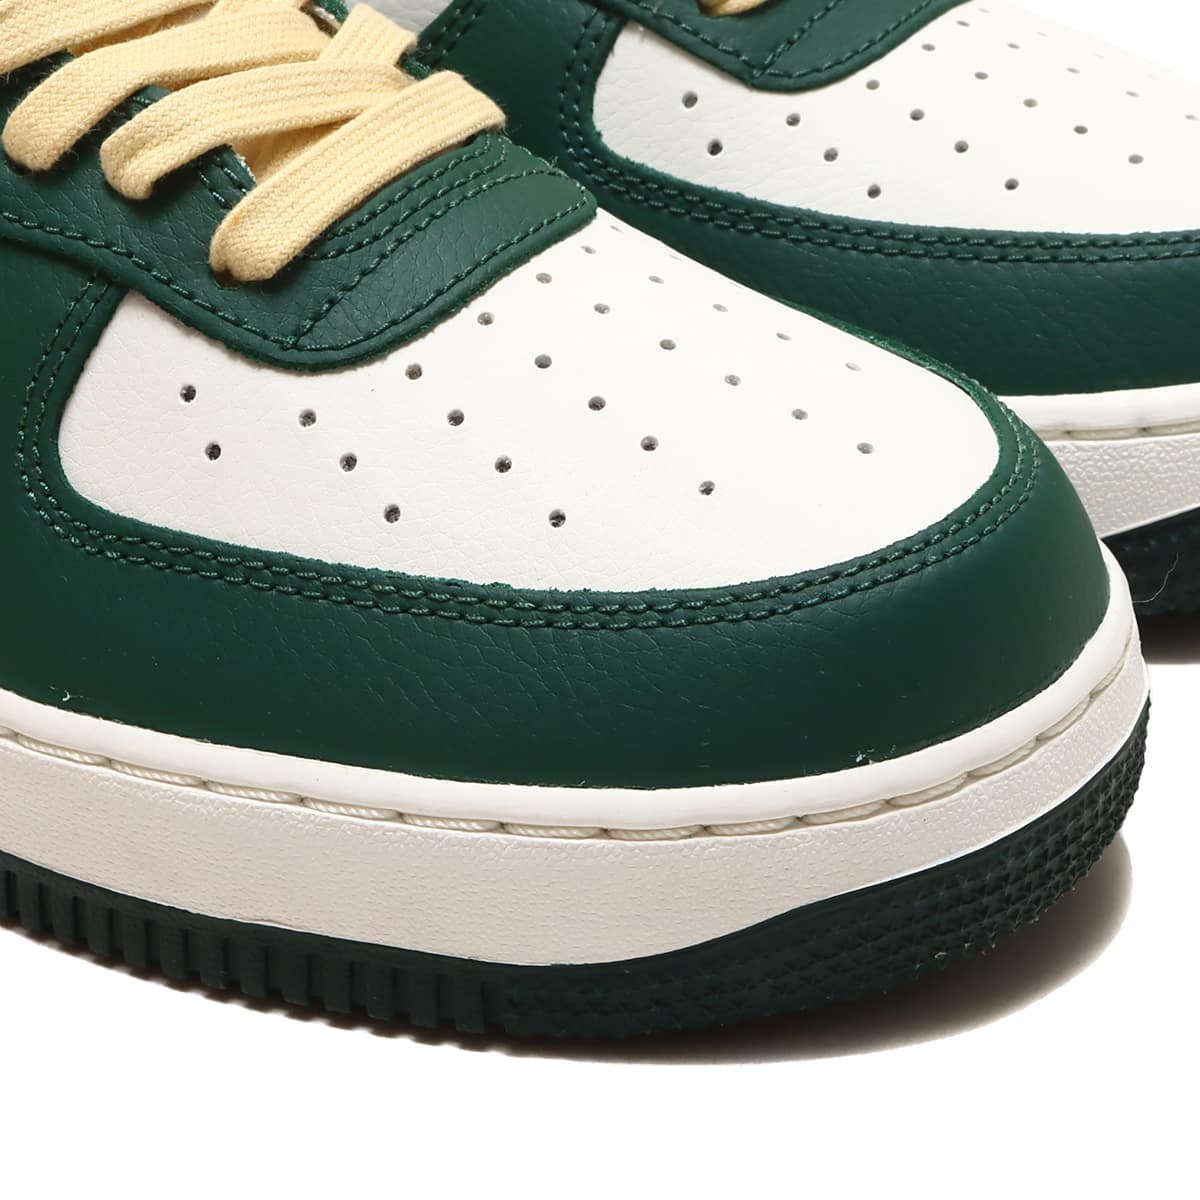 NIKE AIR FORCE 1 '07 LV8 SAIL/NOBLE GREEN-OPTI YELLOW-PICANTE RED